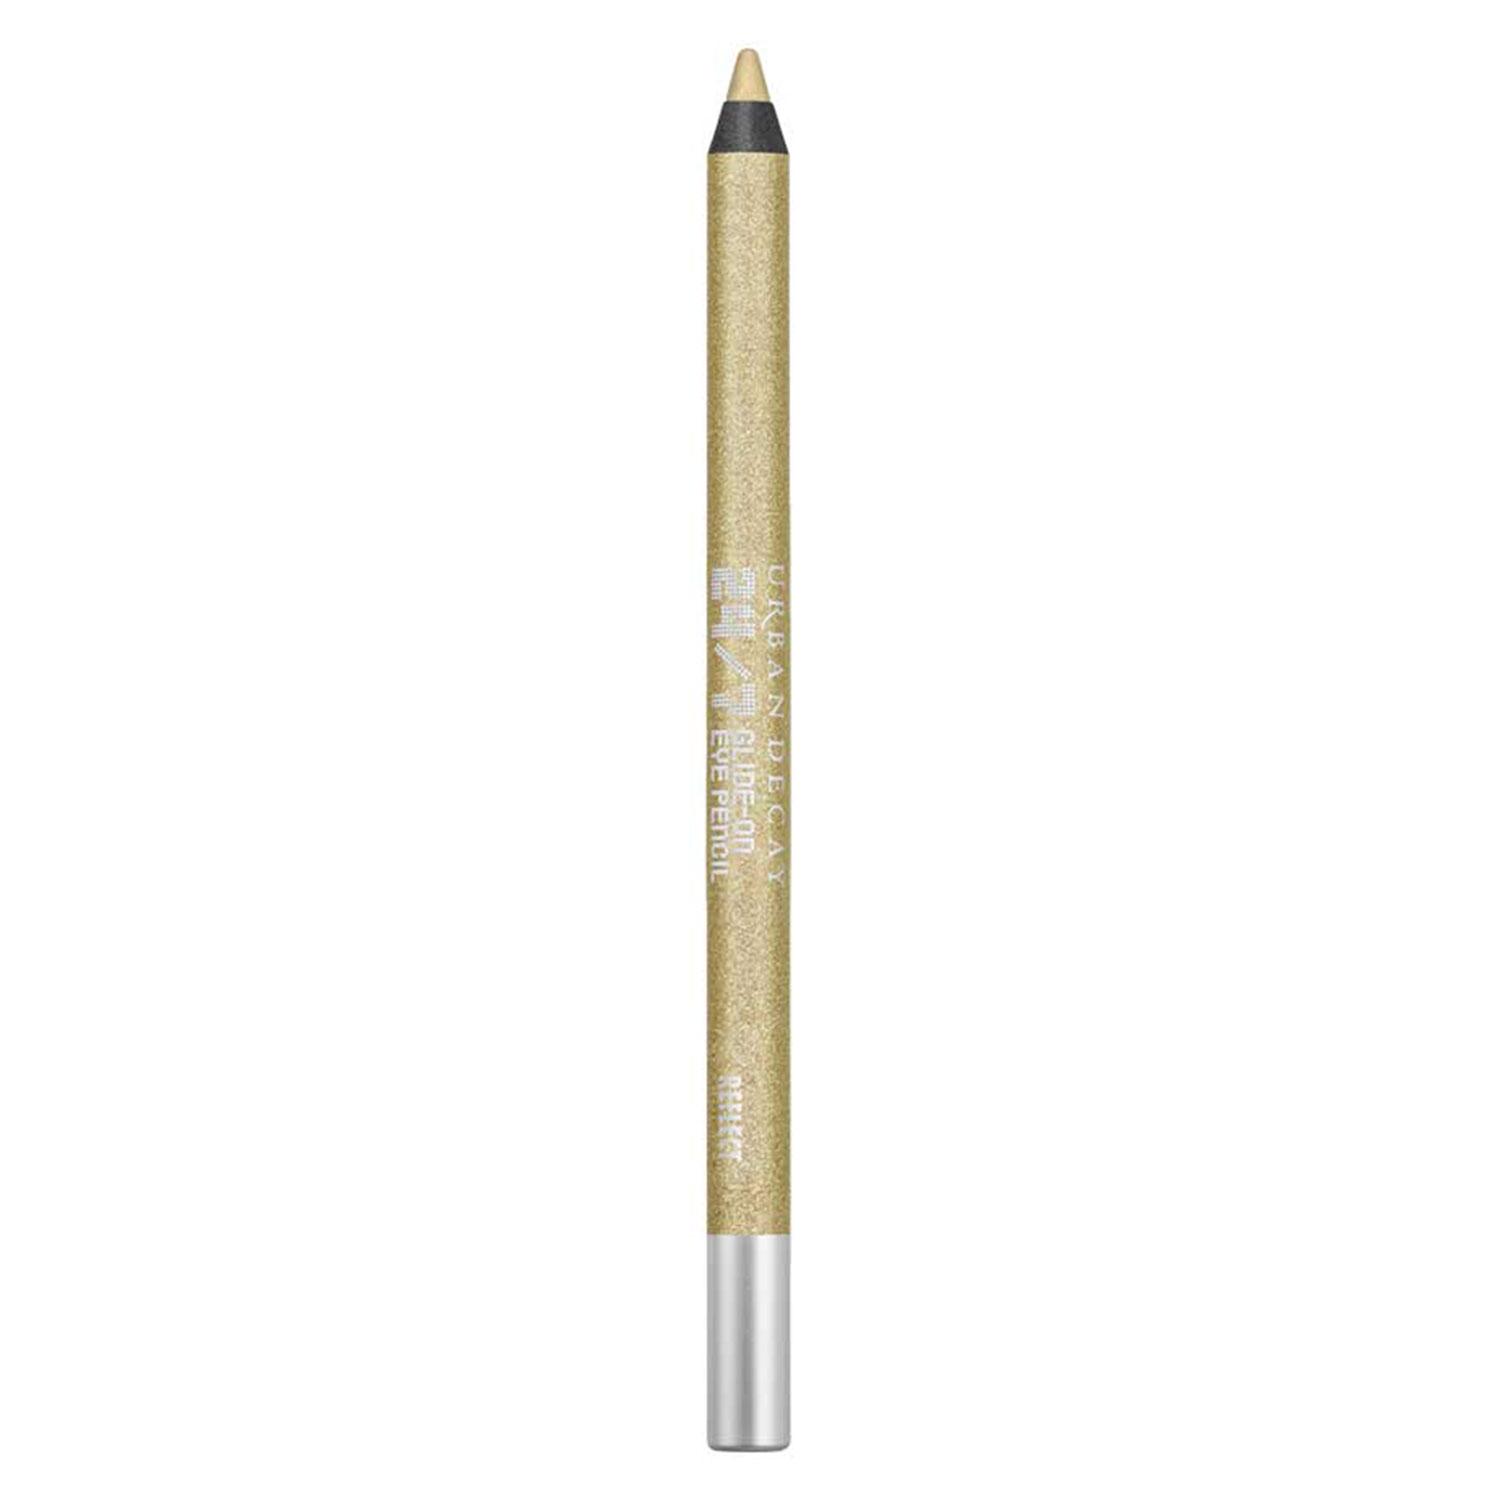 Stoned Vibes - 24/7 Glide-On - Eye Pencil Reflect